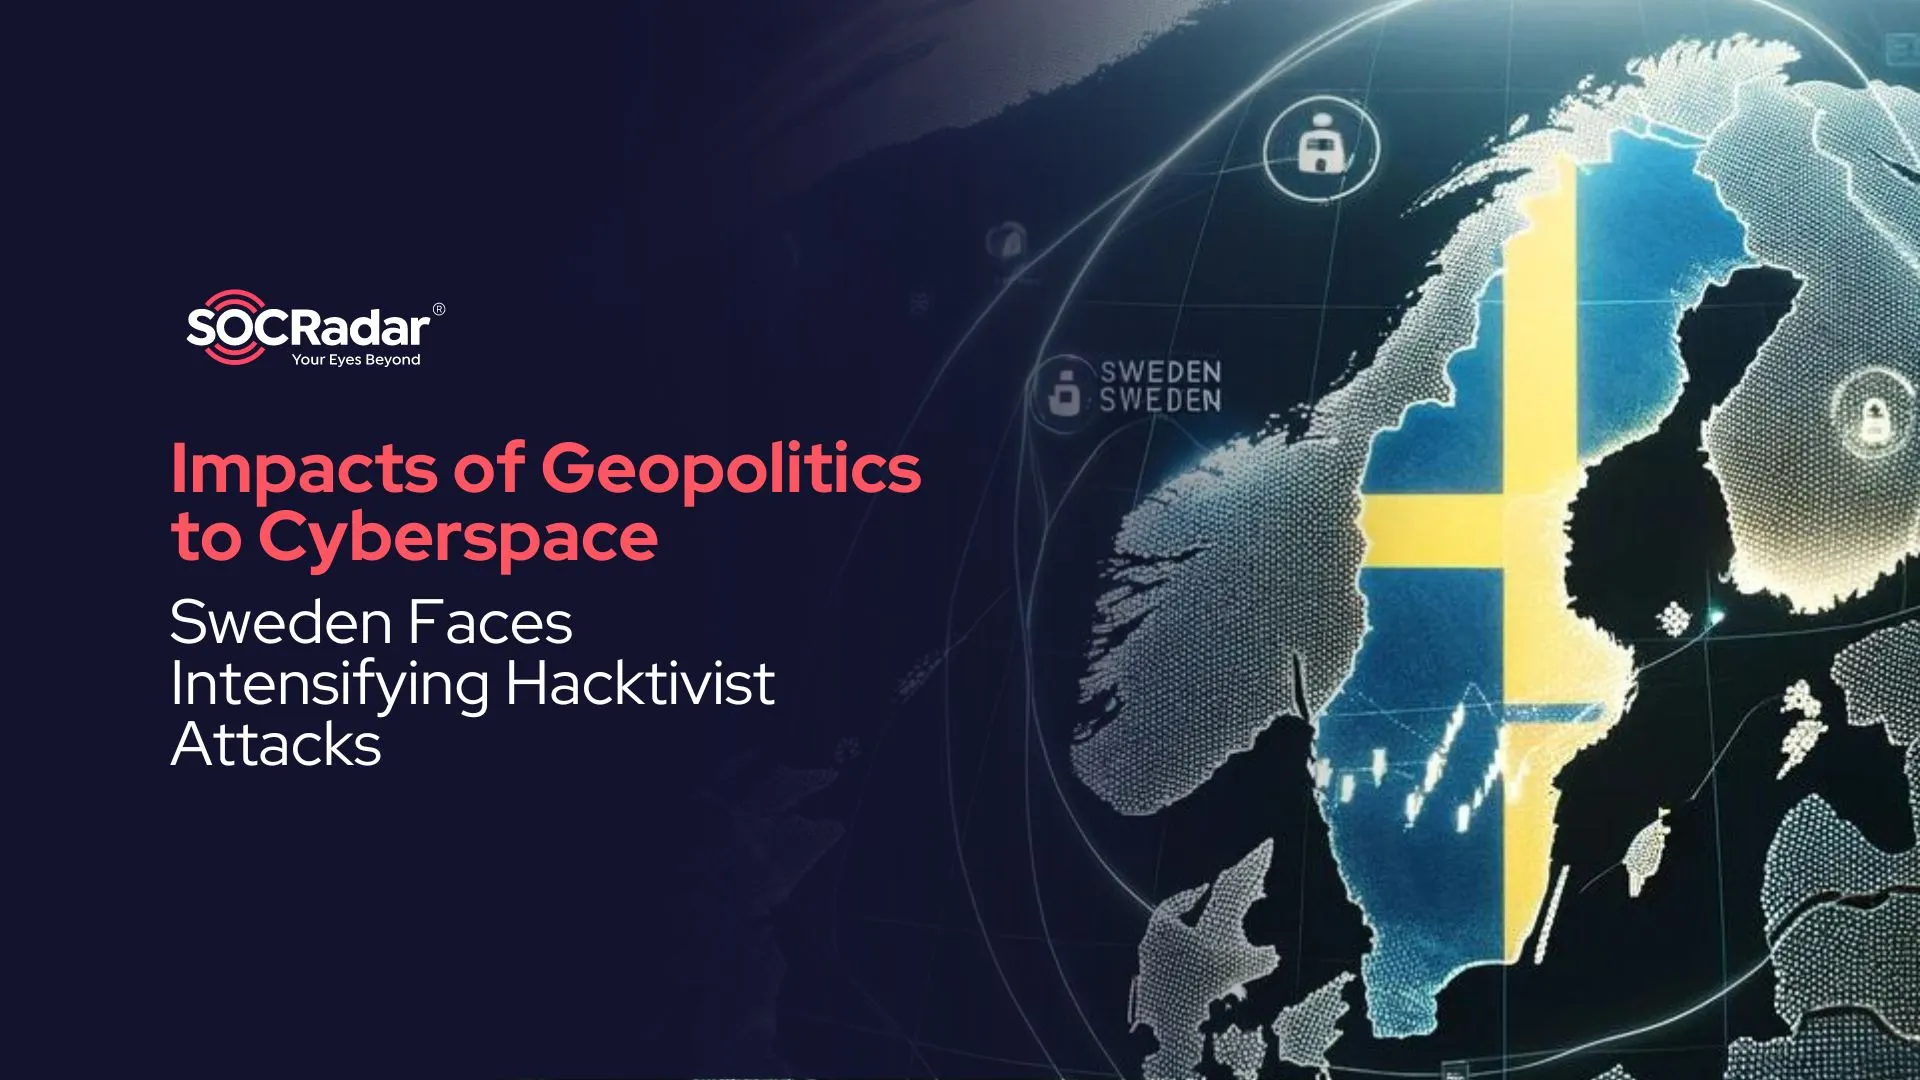 SOCRadar® Cyber Intelligence Inc. | Impacts of Geopolitics to Cyberspace: Sweden Faces Intensifying Hacktivist Attacks